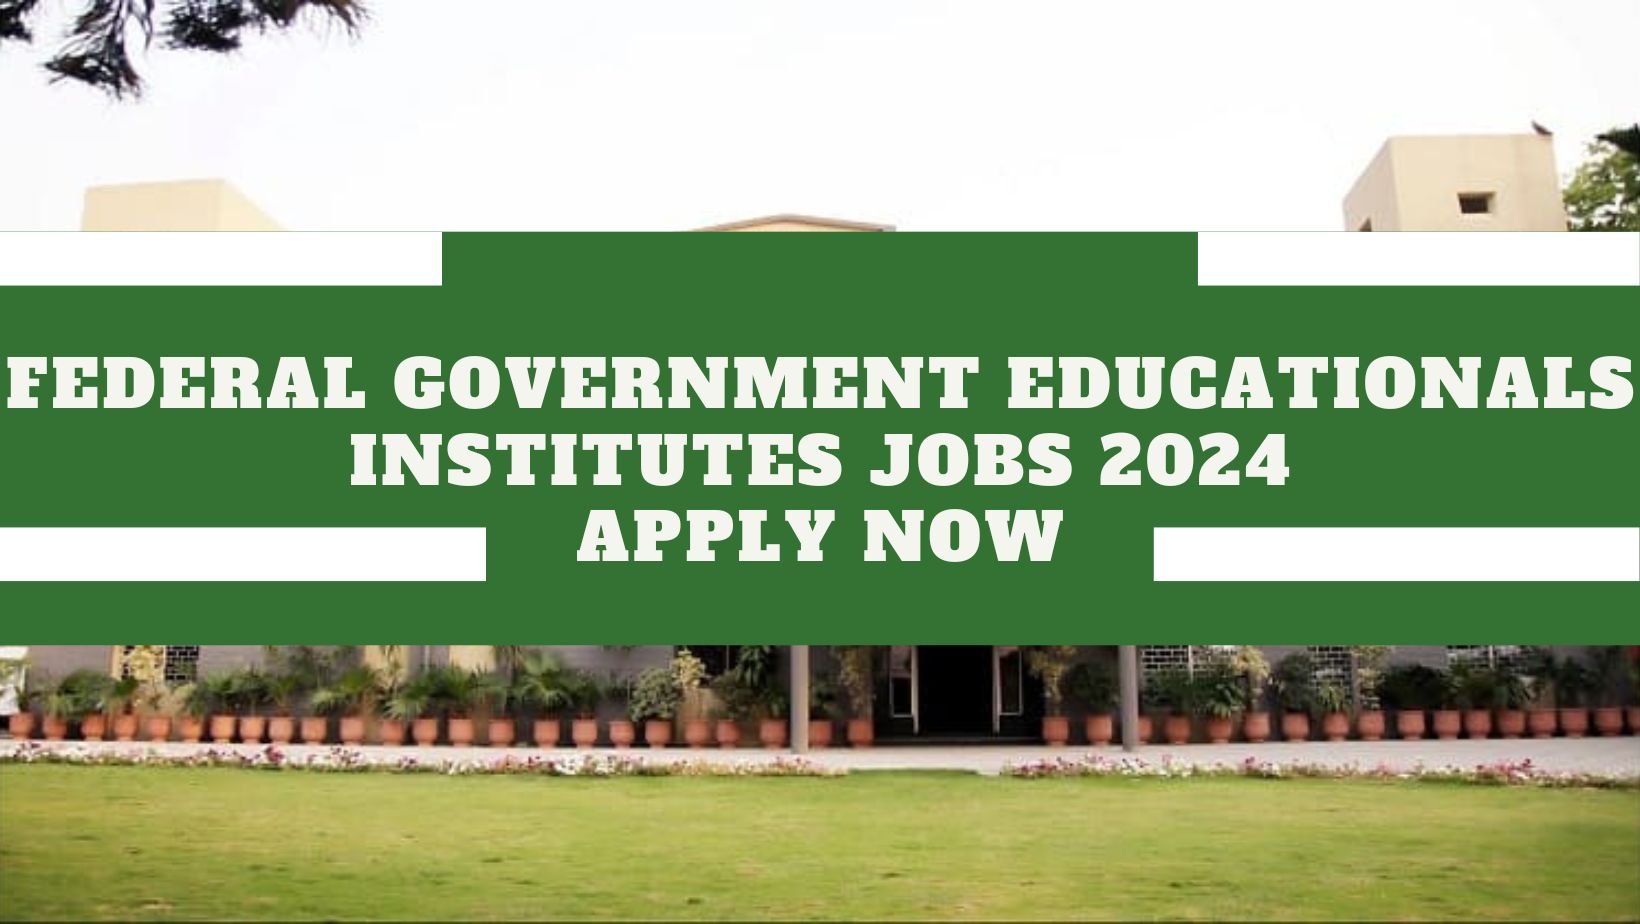 FGEI JOBS 2024 – FEDERAL GOVERNMENT EDUCATIONAL INSTITUTIONS | APPLY NOW